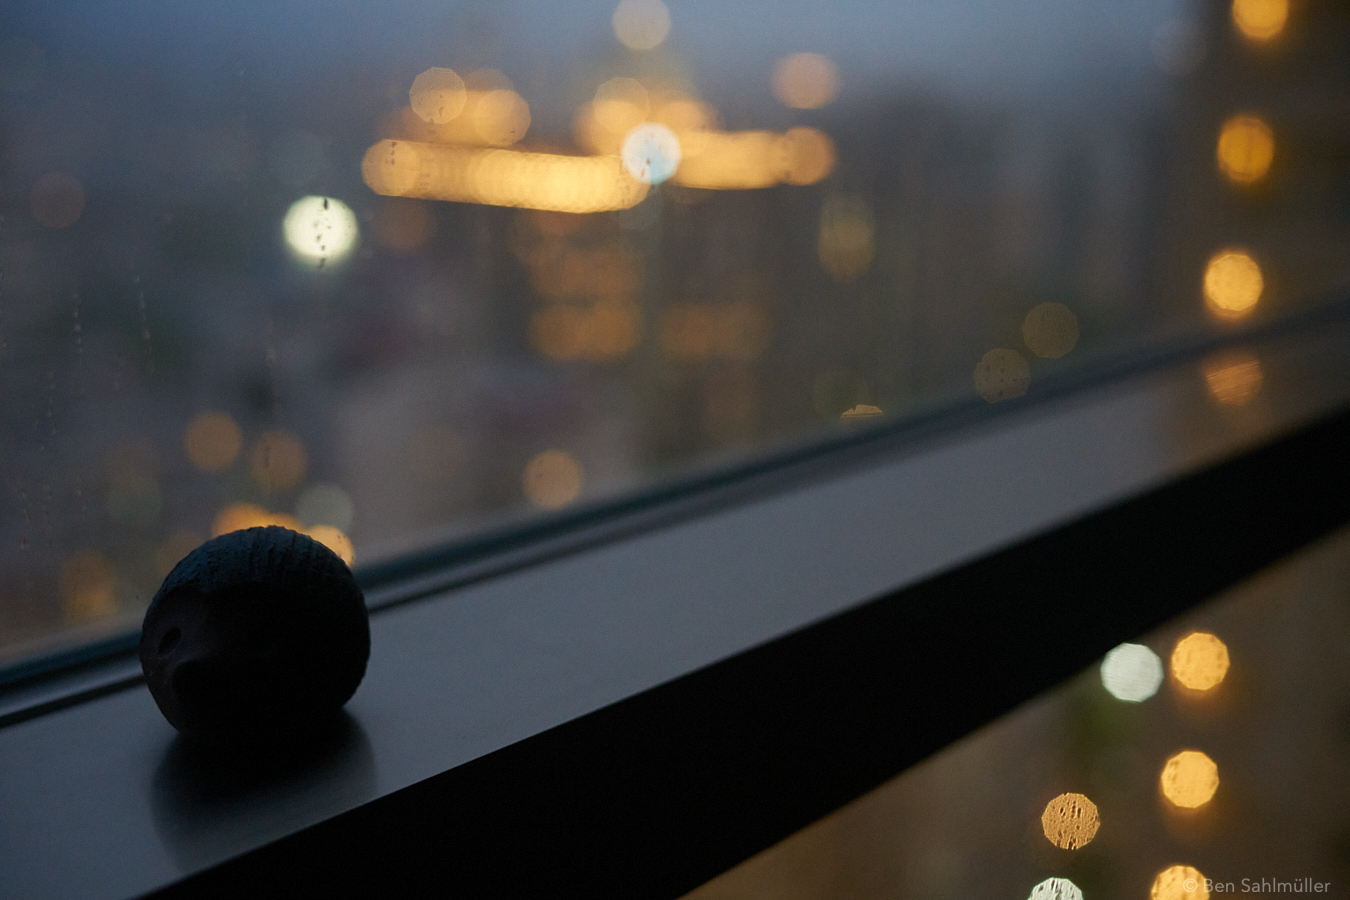 A clay hedgehog on a window sill, "looking" into the night outside. There are some buildings in the background, vaguely visible.